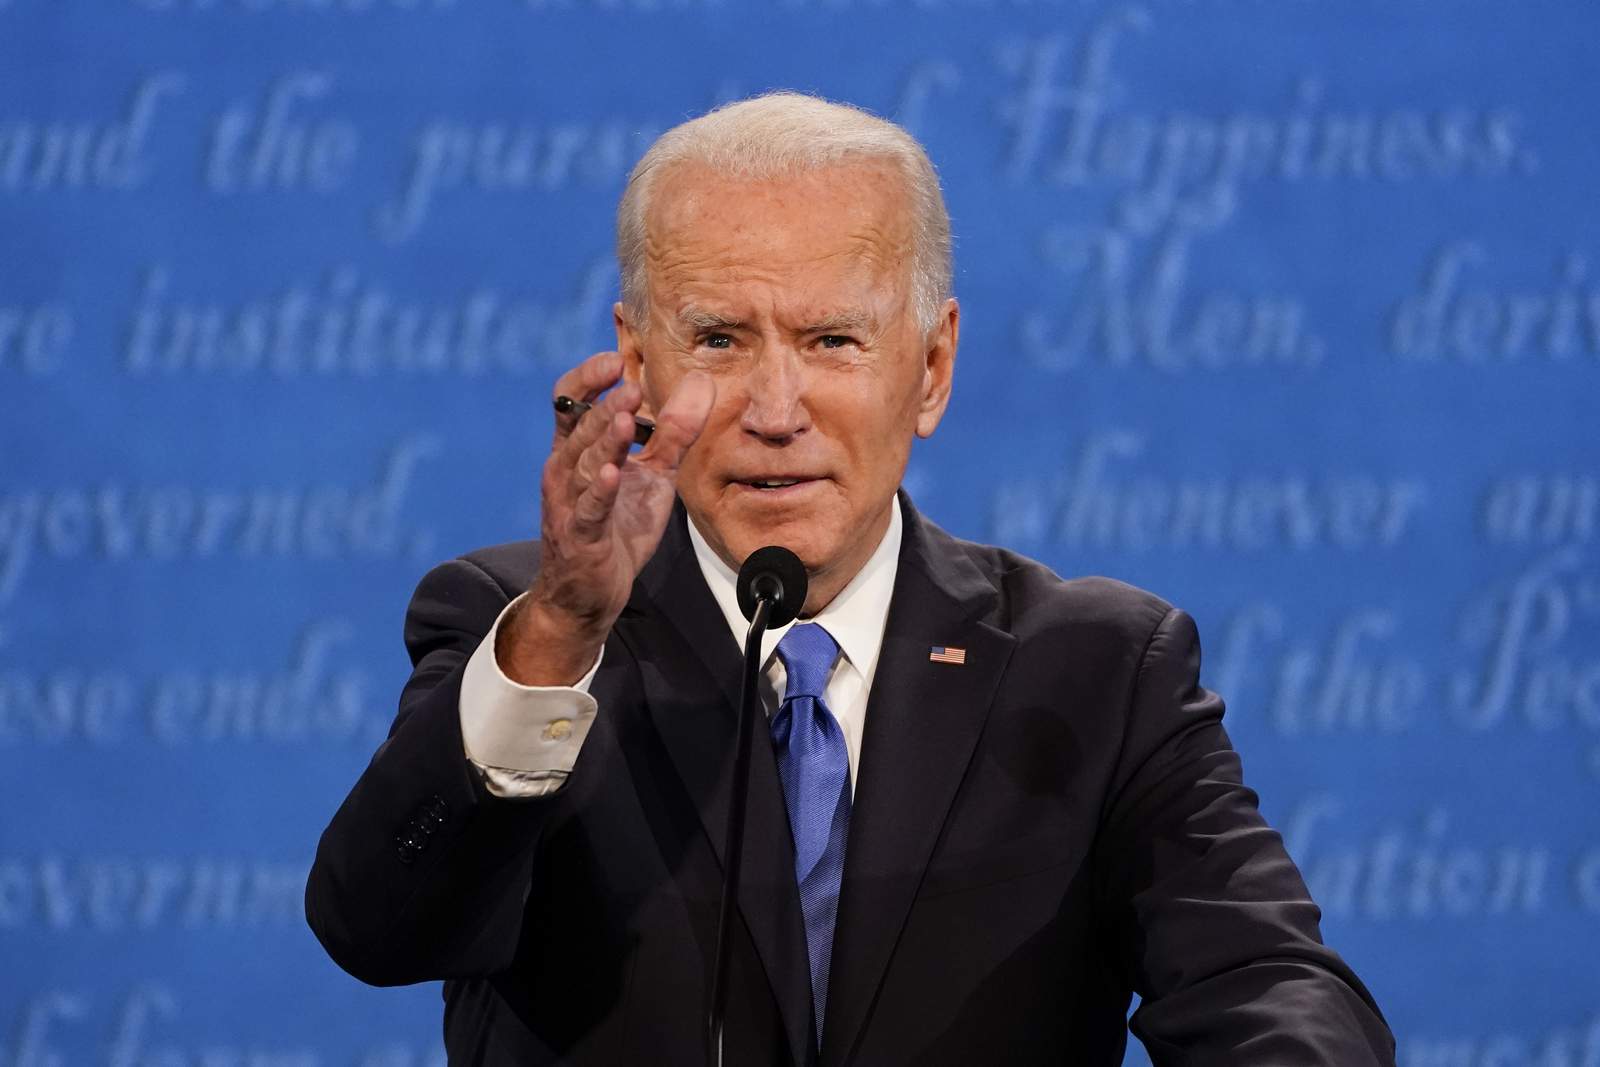 AP Projects: Joe Biden wins District of Columbia in presidential election